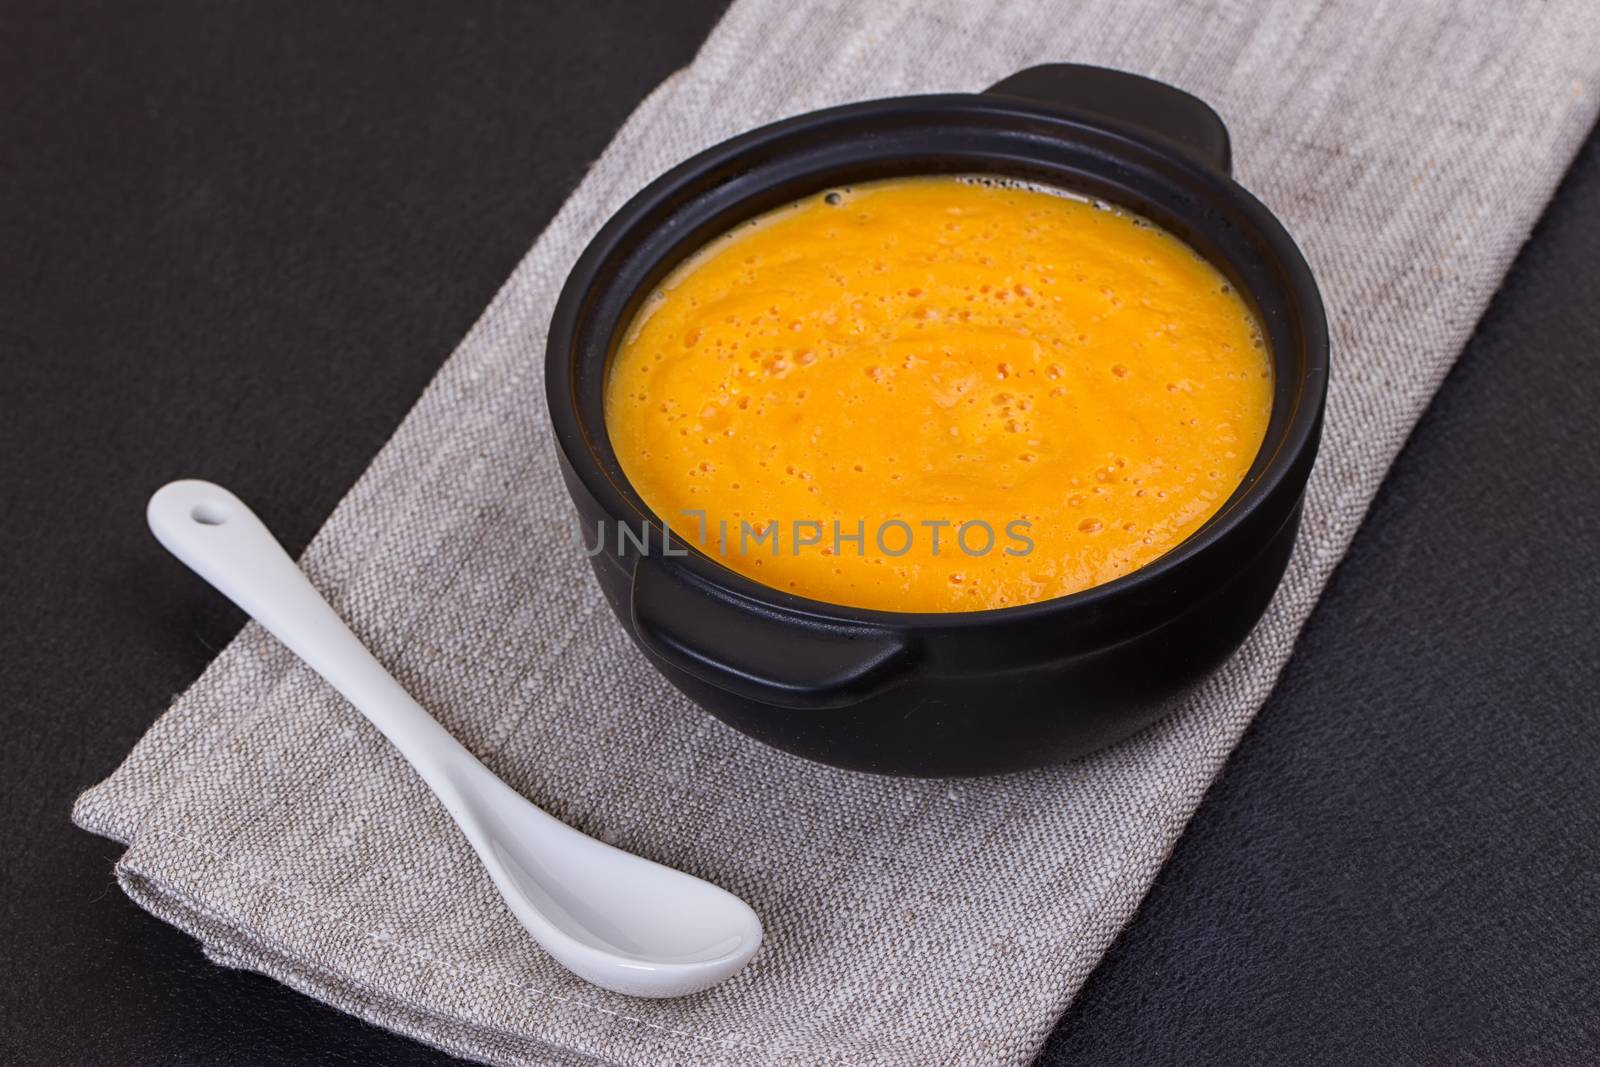 Pumpkin and carrot soup with cream and parsley on dark background